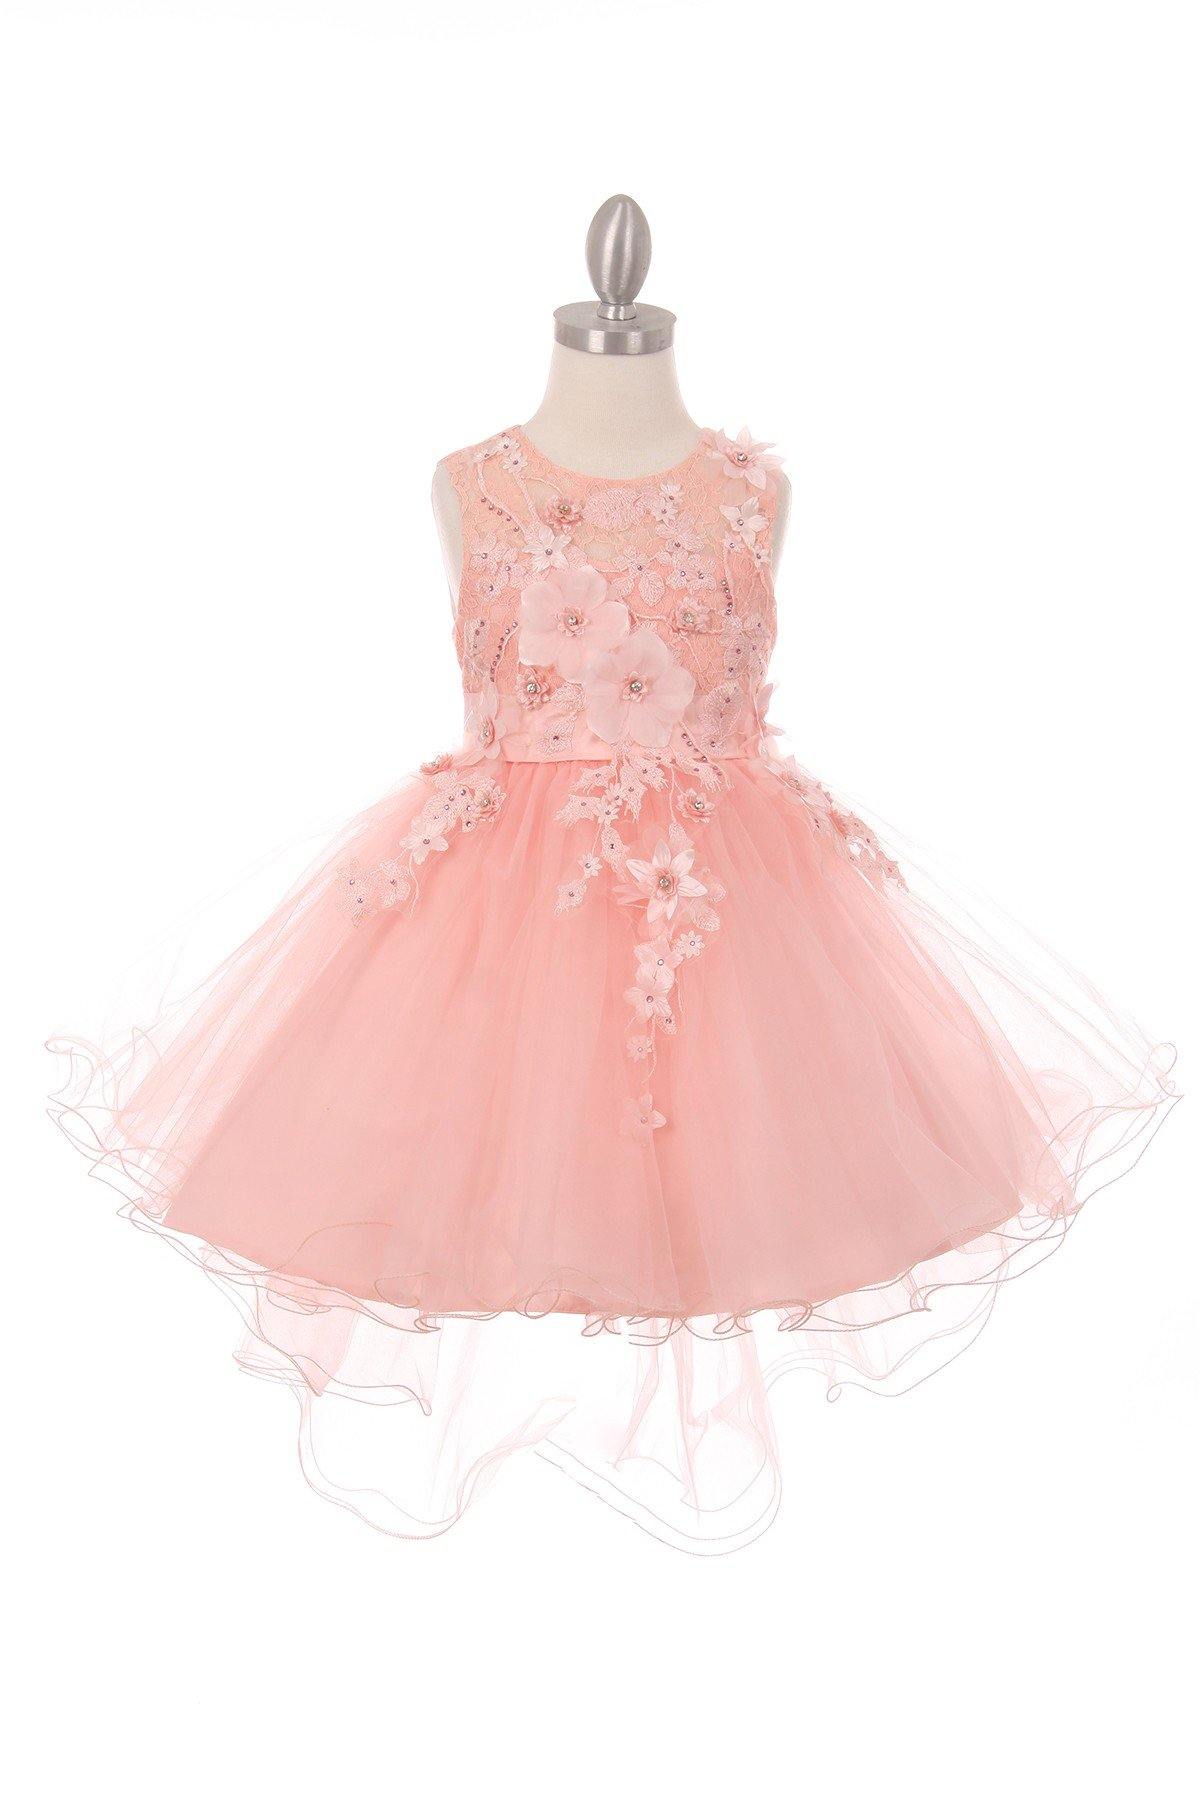 Short High Low Floral and Tulle Flower Girls Dress - The Dress Outlet Cinderella Couture